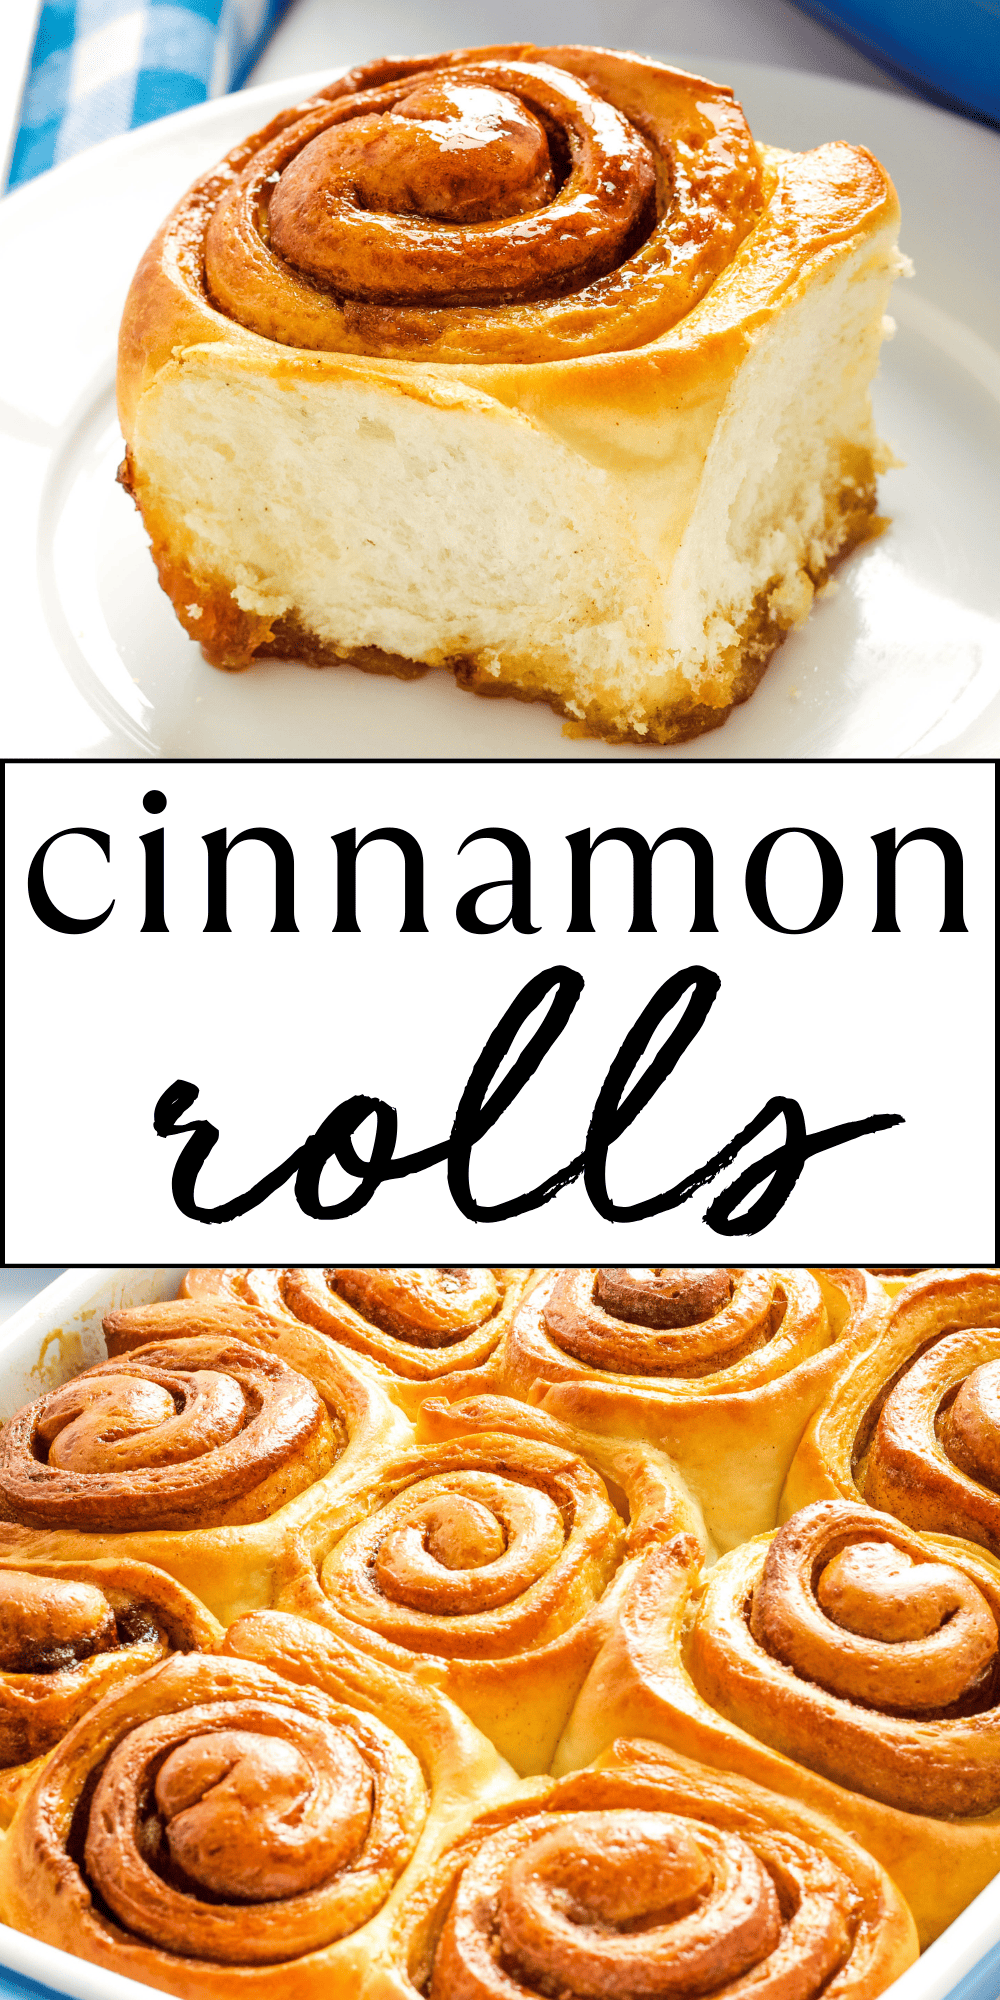 This Cinnamon Rolls recipe is the ultimate guide to making the perfect cinnamon rolls - sweet, sticky, soft and fluffy, and made with a secret ingredient! Follow our Pro Tips and Tricks for the BEST homemade cinnamon buns! Recipe from thebusybaker! #cinnamonroll #cinnamonrollrecipe #cinnamonrolls #easycinnamonrolls #bestevercinnamonrolls #homemadecinnamonrolls via @busybakerblog